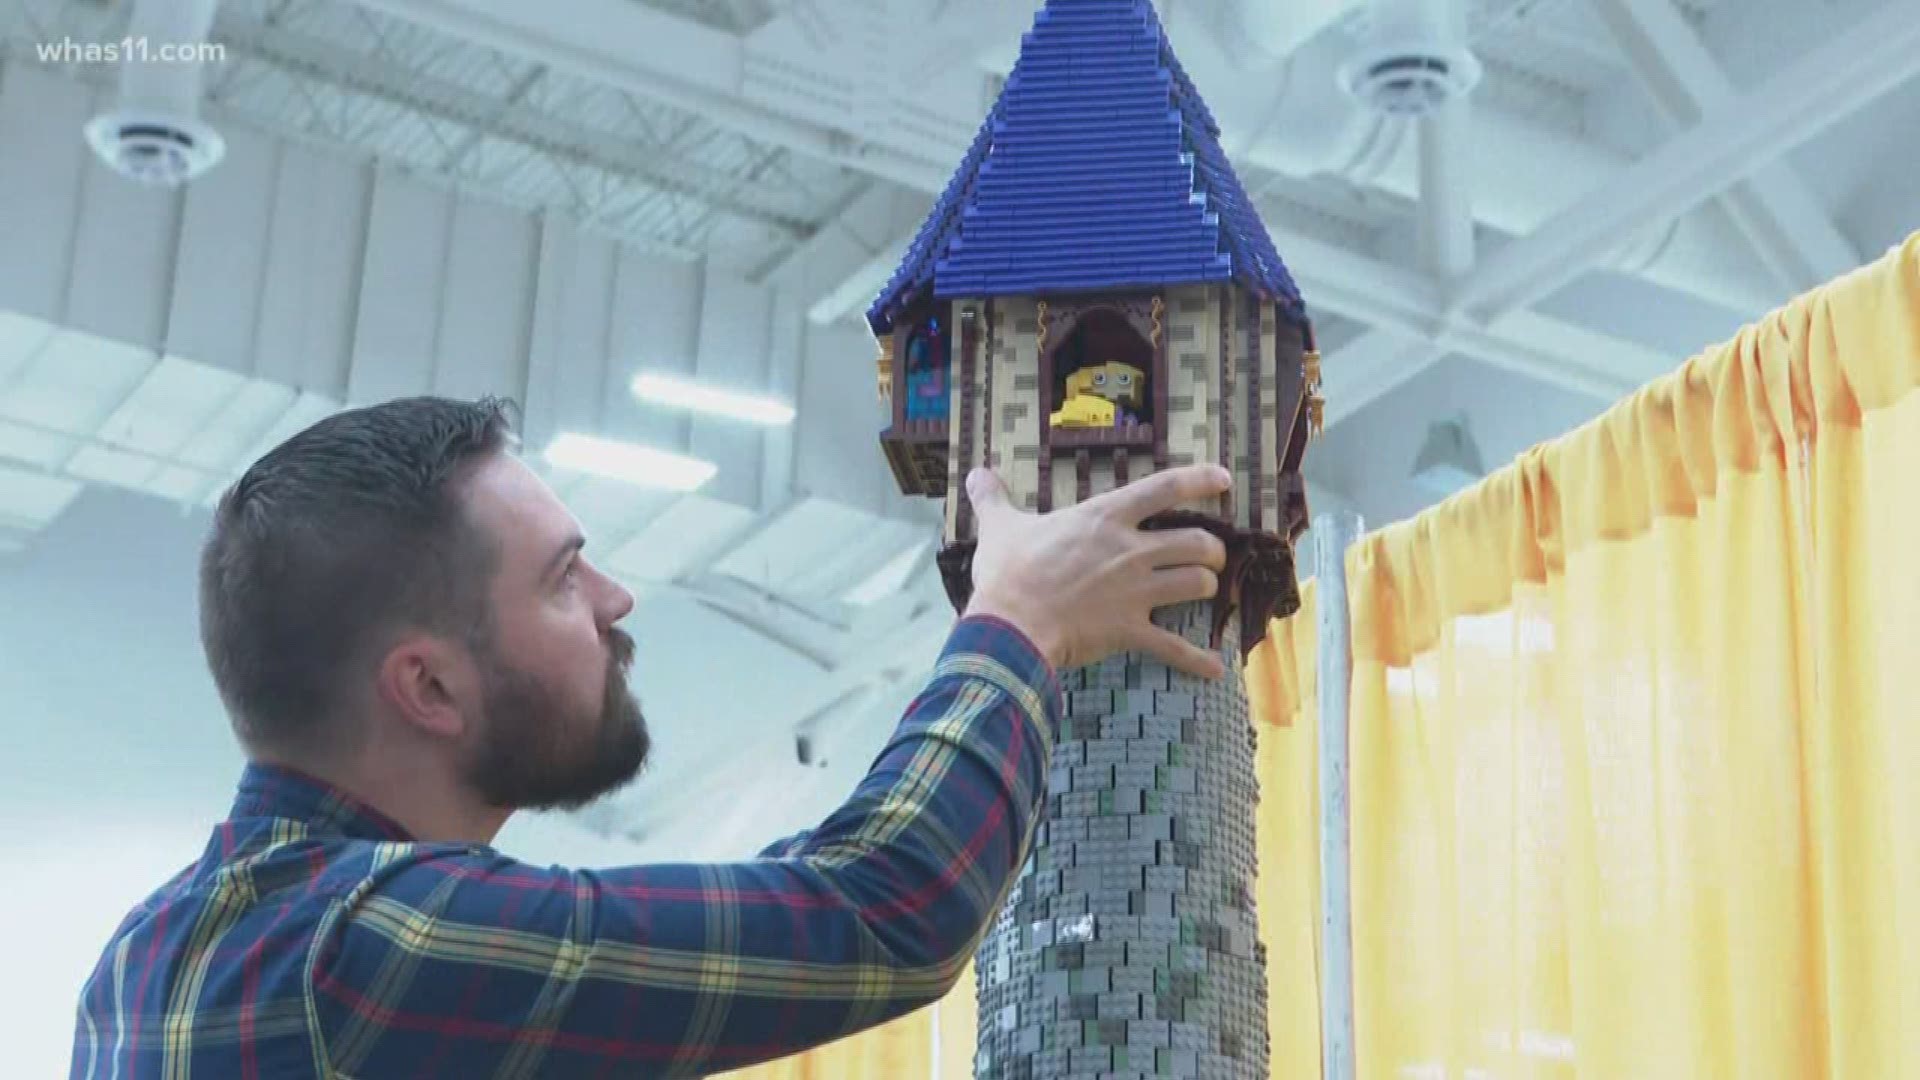 Louisville was introduced to Lego displays featuring award-winning artists from all over the world.